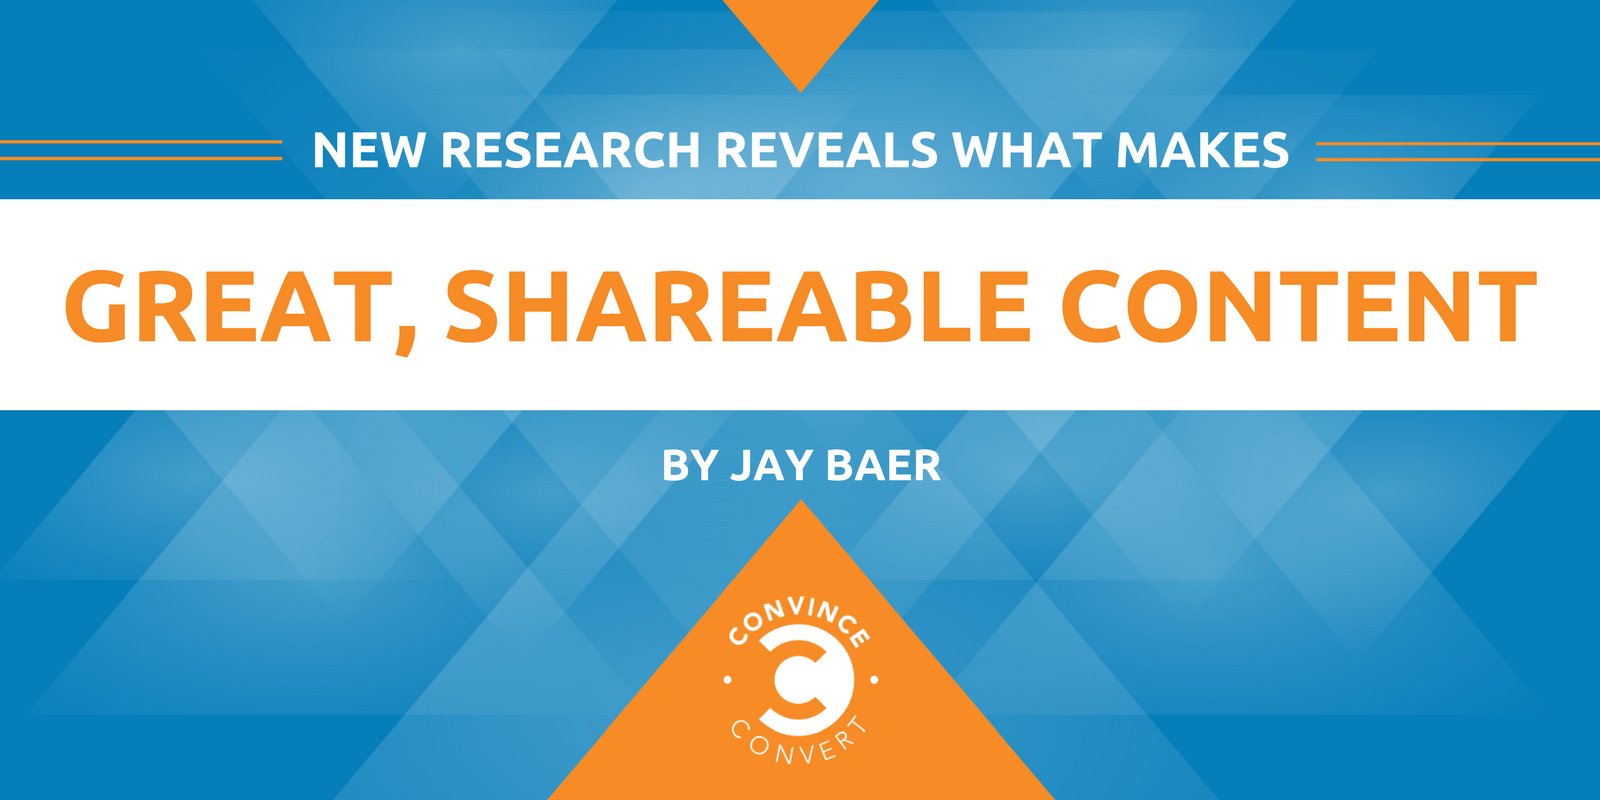 New Research Reveals What Makes Great, Shareable Content